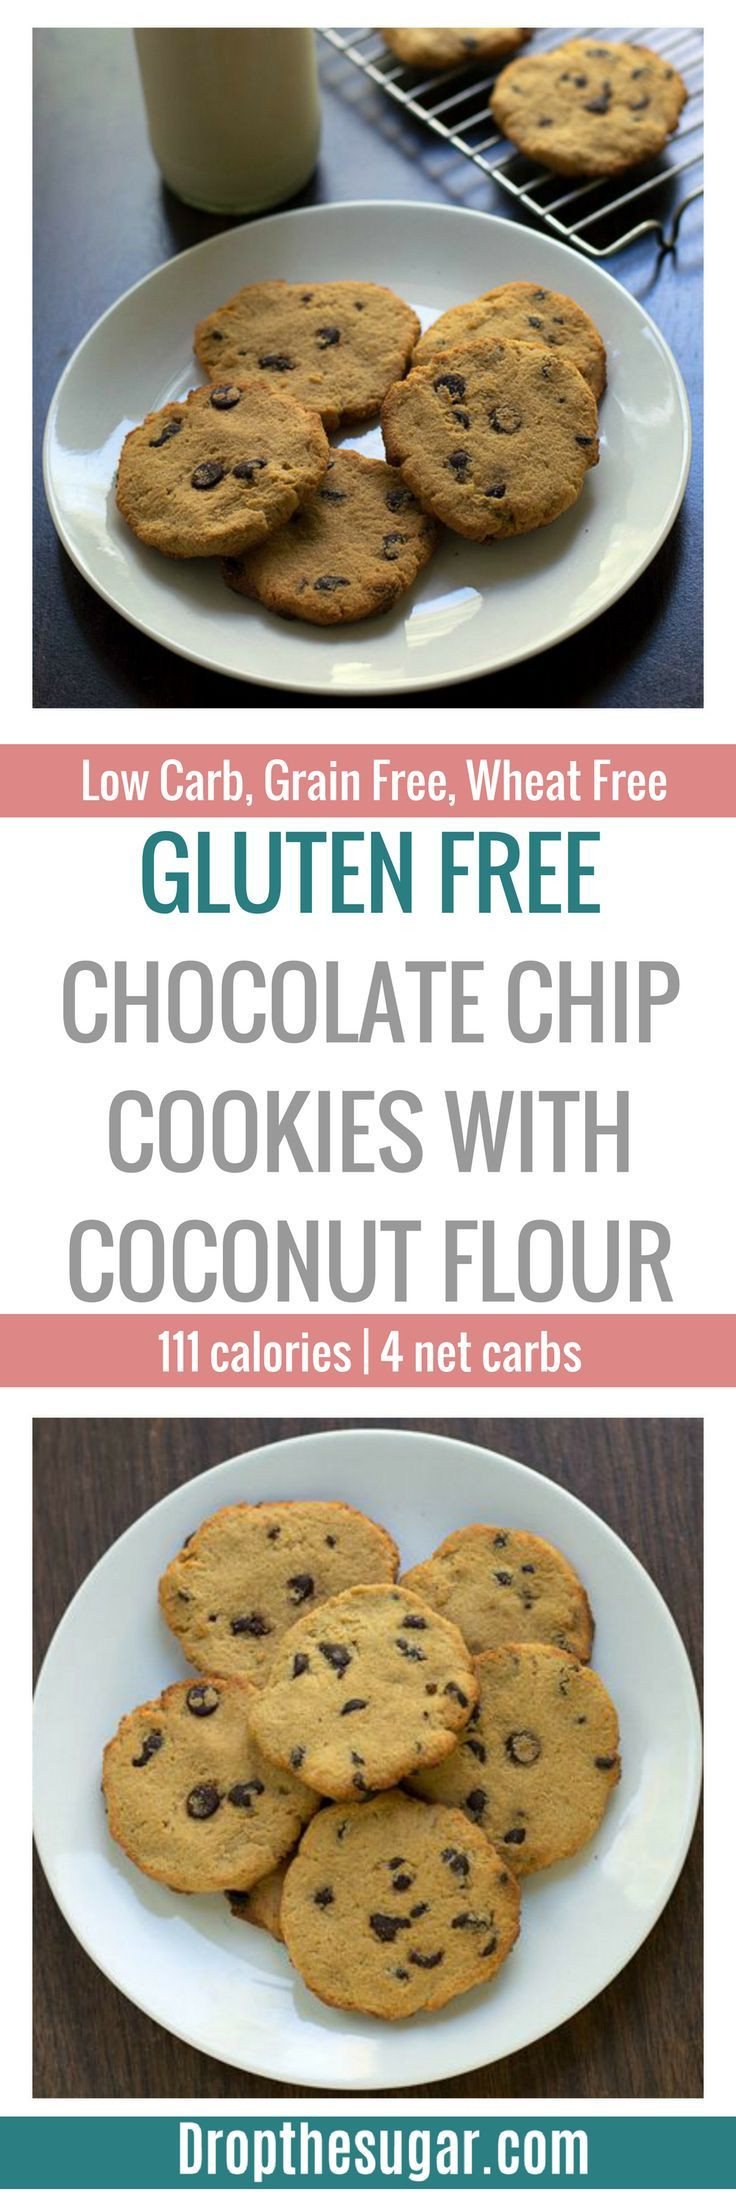 Low Carb Coconut Flour Chocolate Chip Cookies
 316 best images about Low Carb Cookie Recipes on Pinterest